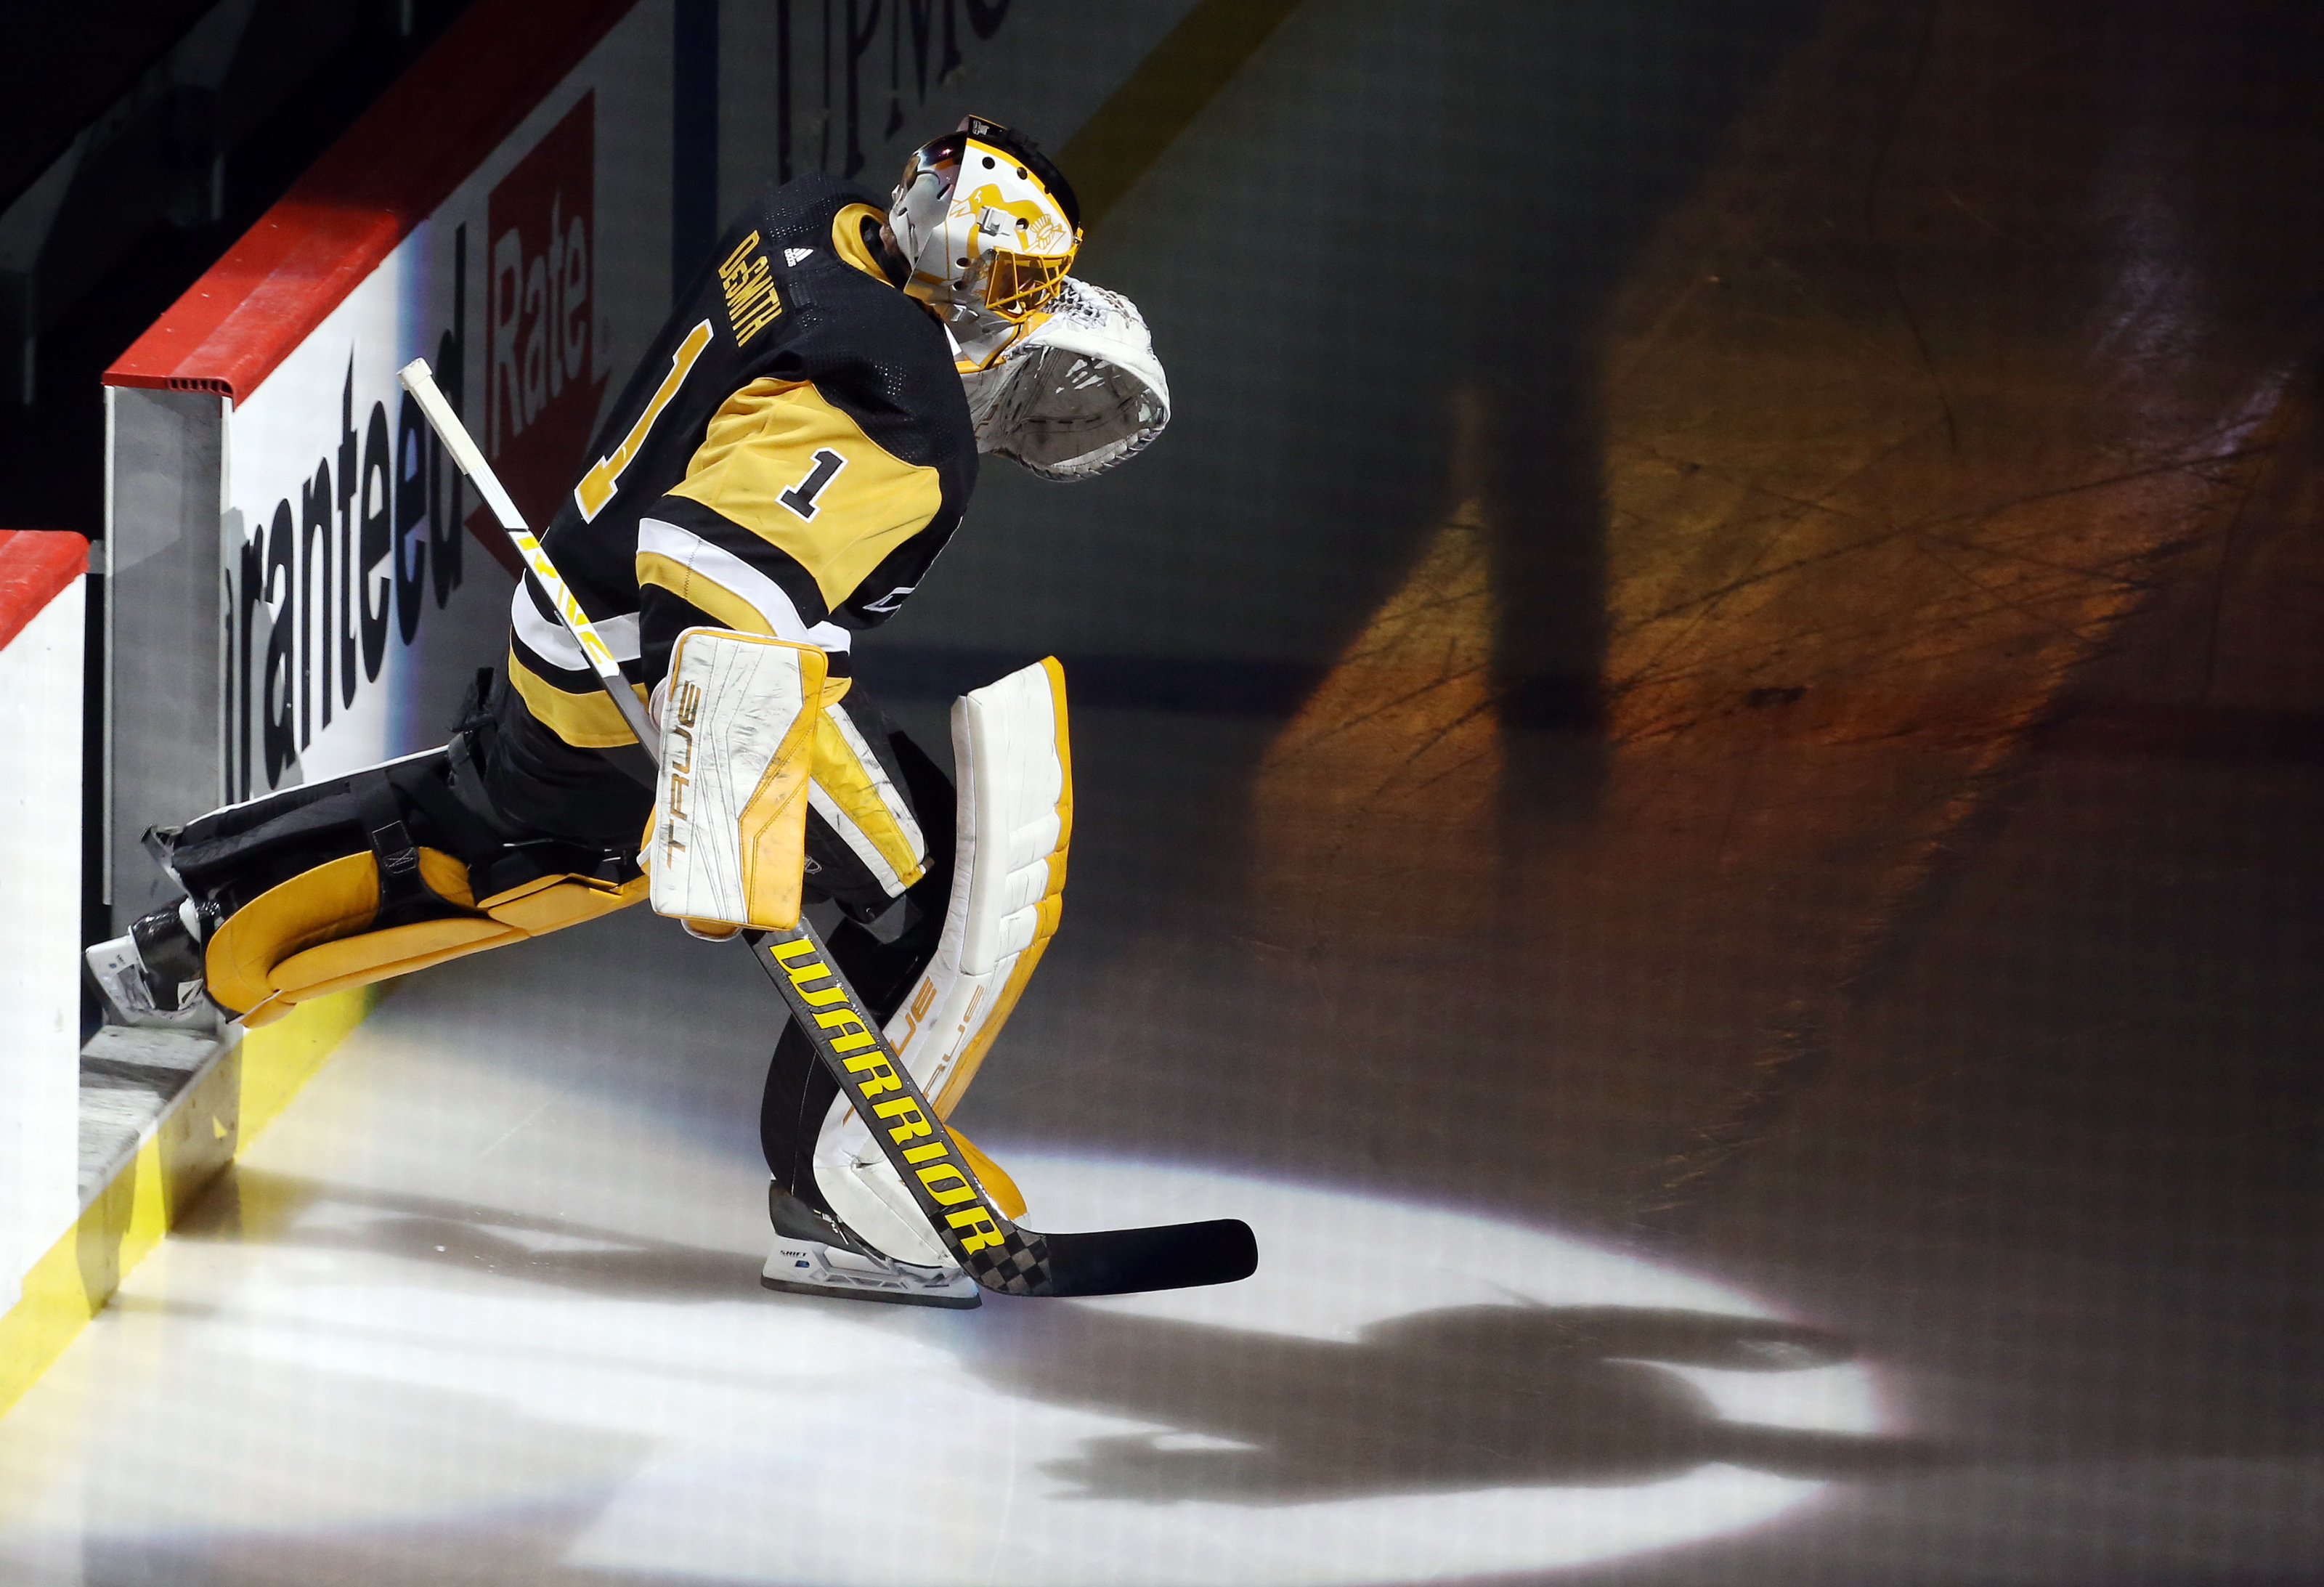 Los Angeles goalie wants to dispense of New Jersey after Game 4 loss at  home – The Denver Post